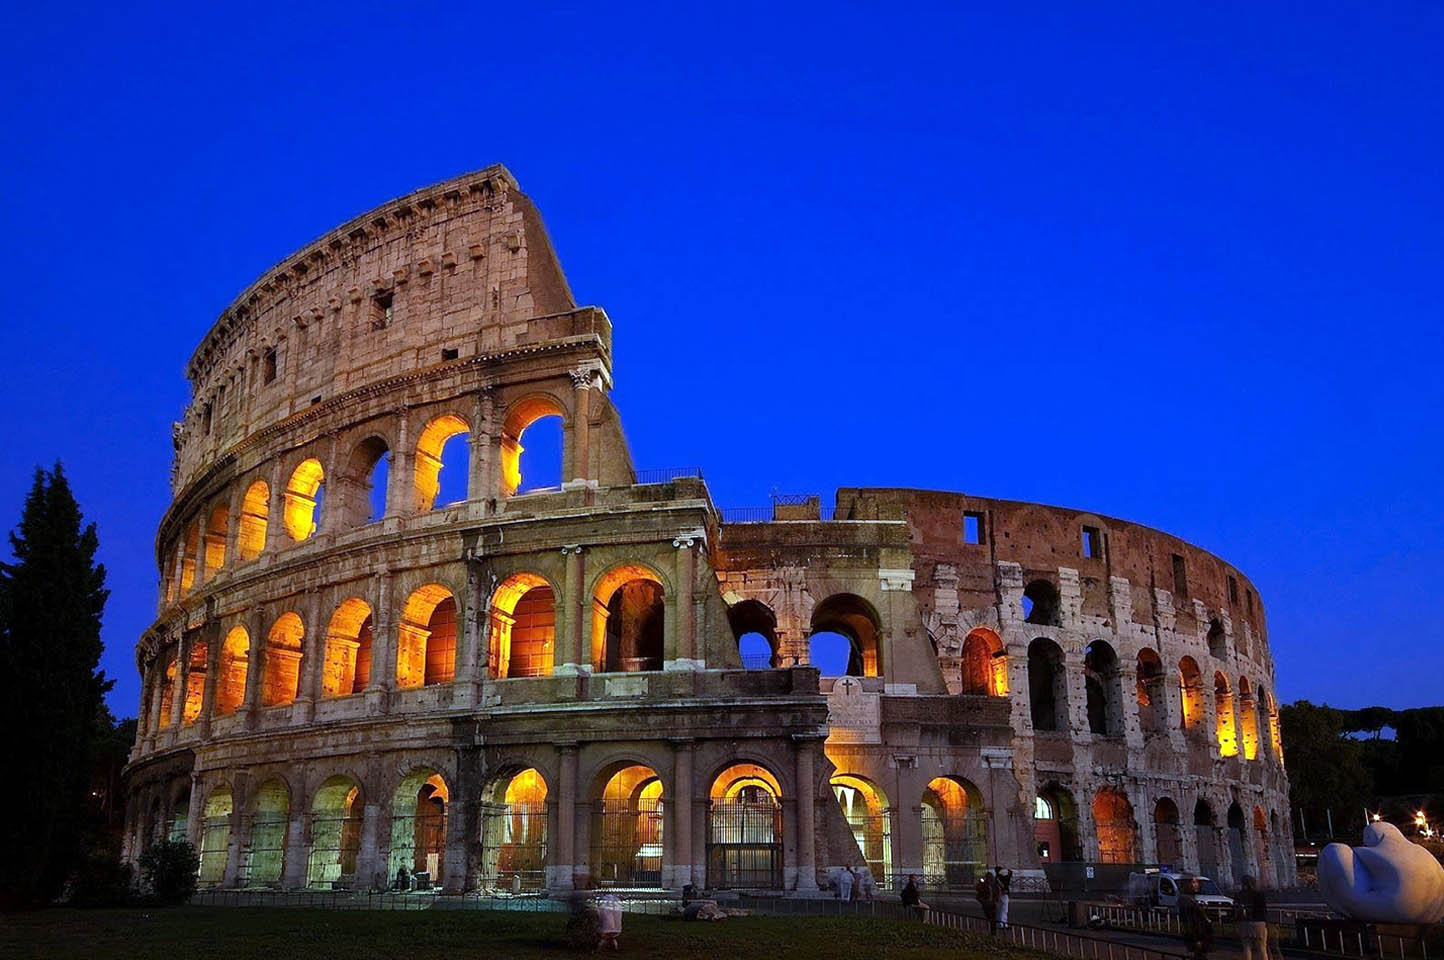 What to know and see when visiting the Colosseum